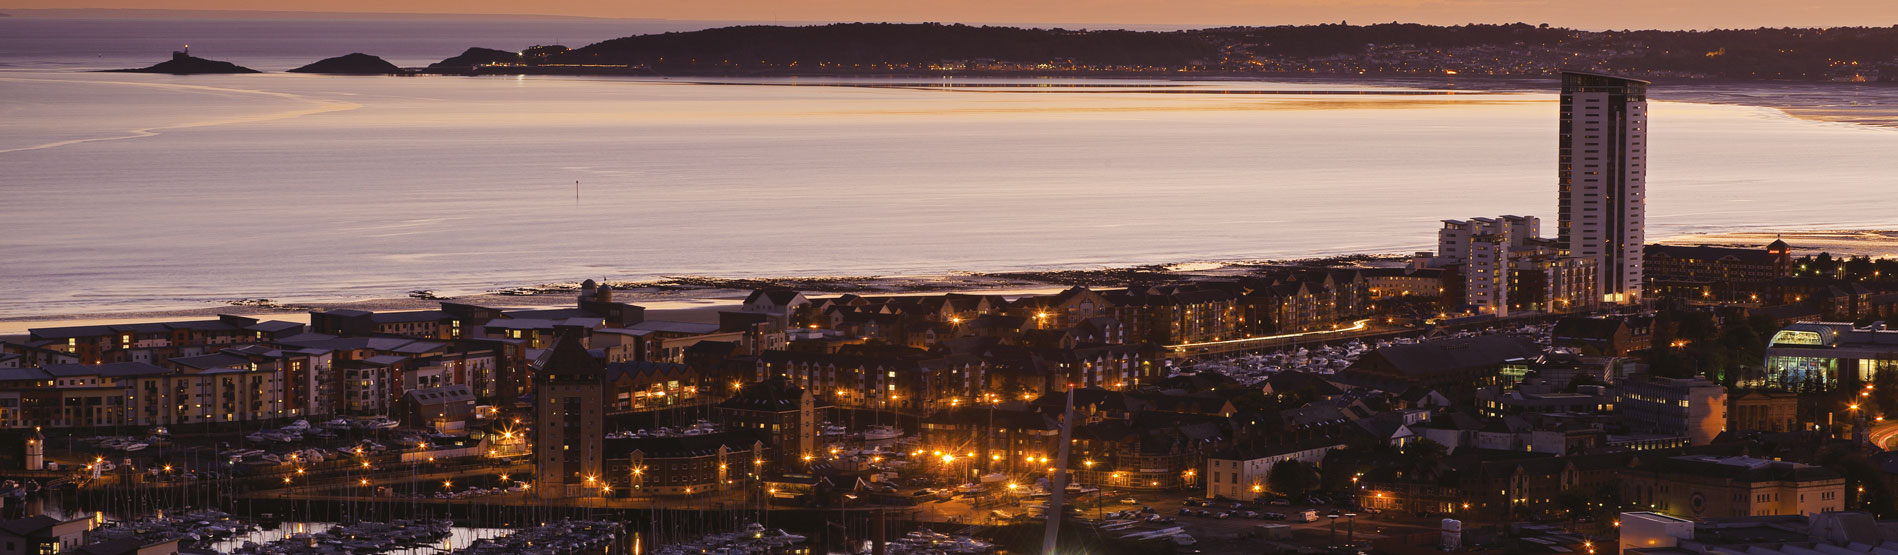 Ariel view of Swansea Bay at Sunset.